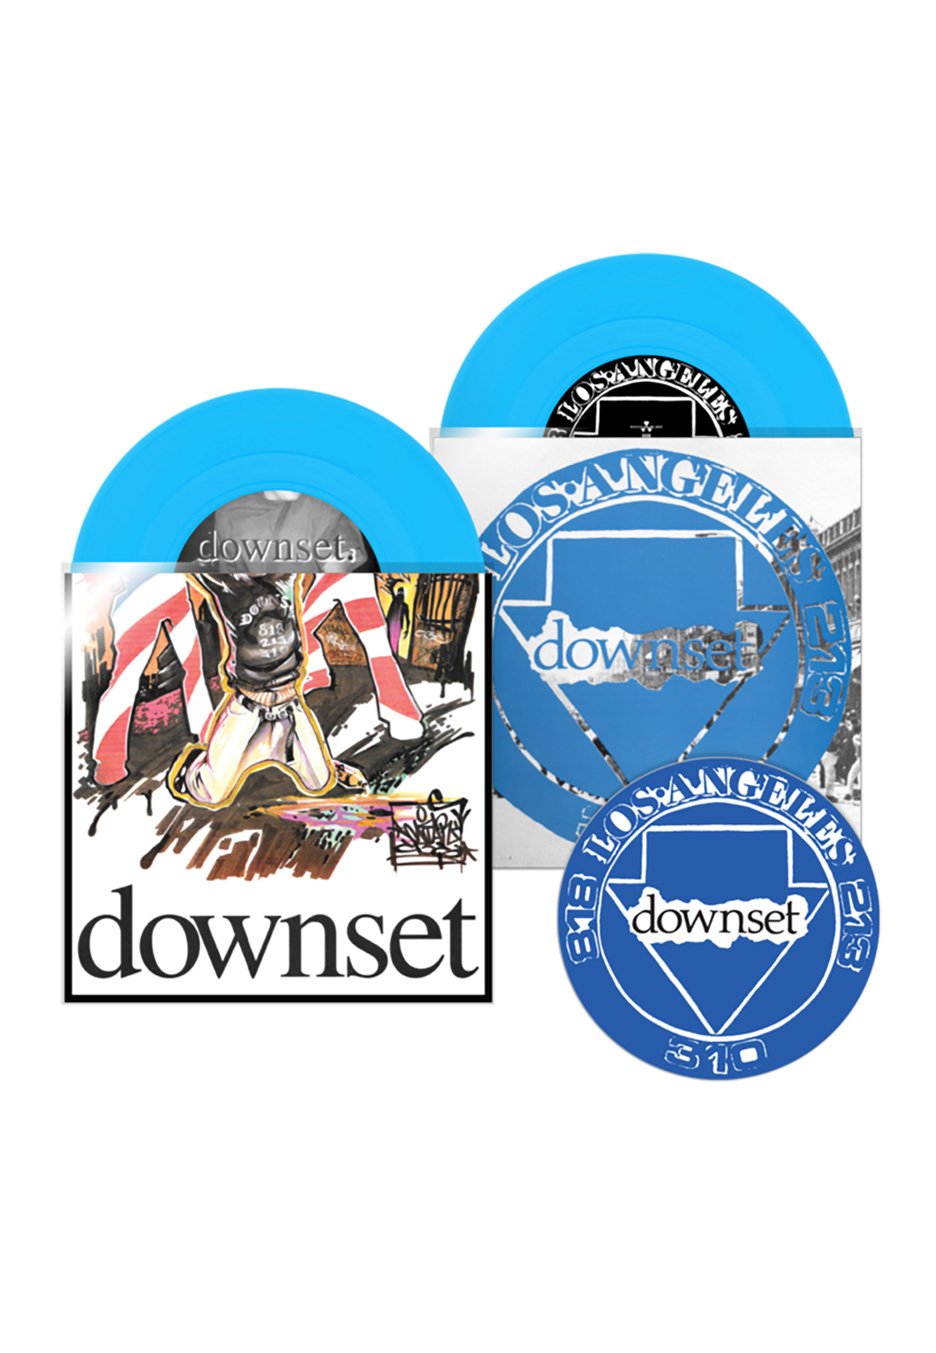 Downset - Downset. '92 Demos (Anger/Ritual/About Ta Blast) 2 X 7Ep Blue Vinyl Blue - Colored 7 Inch